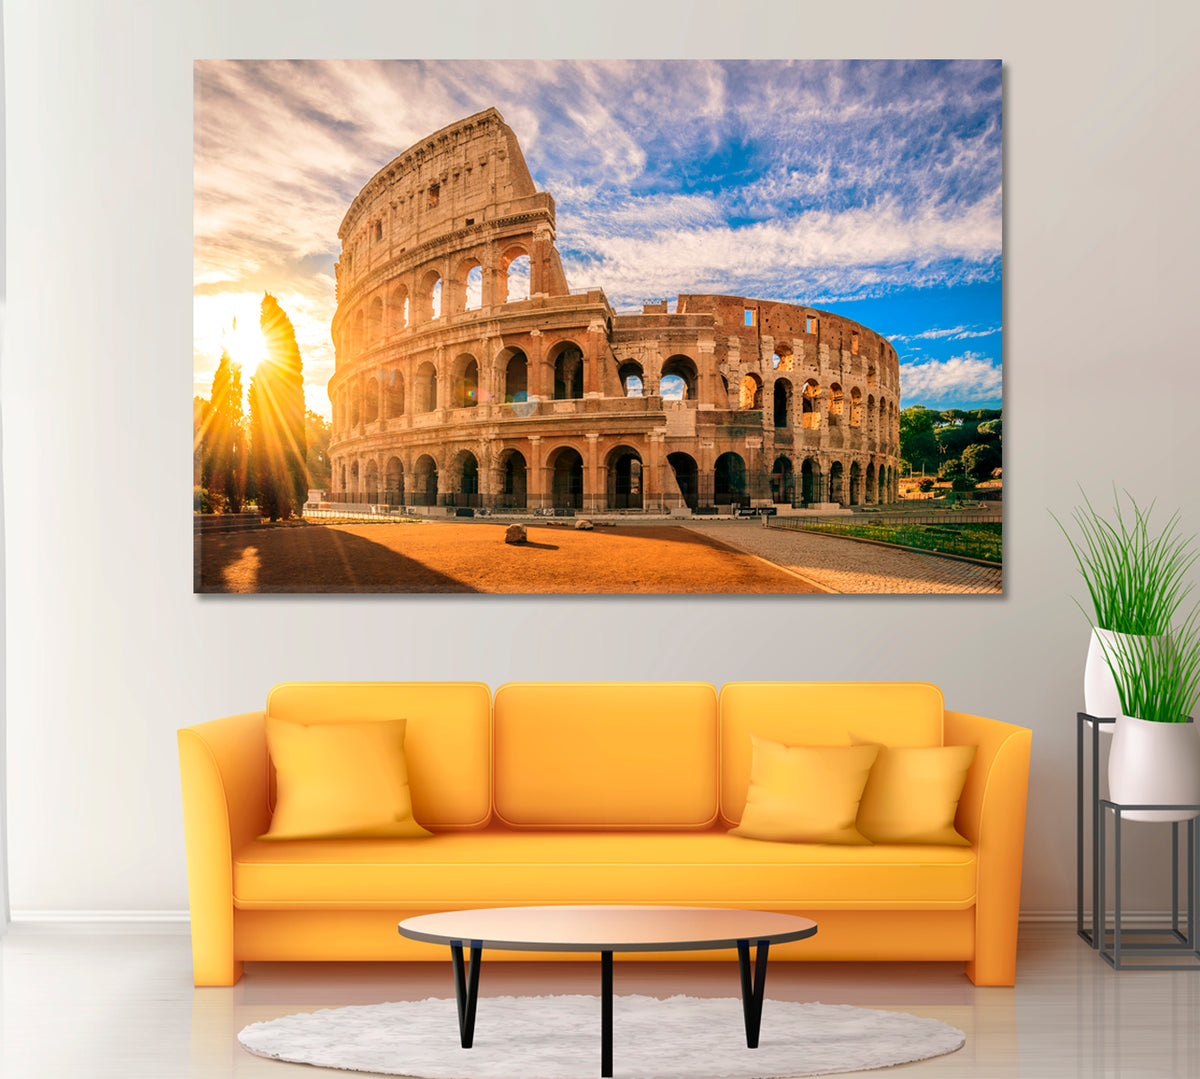 Colosseum at Sunrise Rome Italy Canvas Print ArtLexy 1 Panel 24"x16" inches 